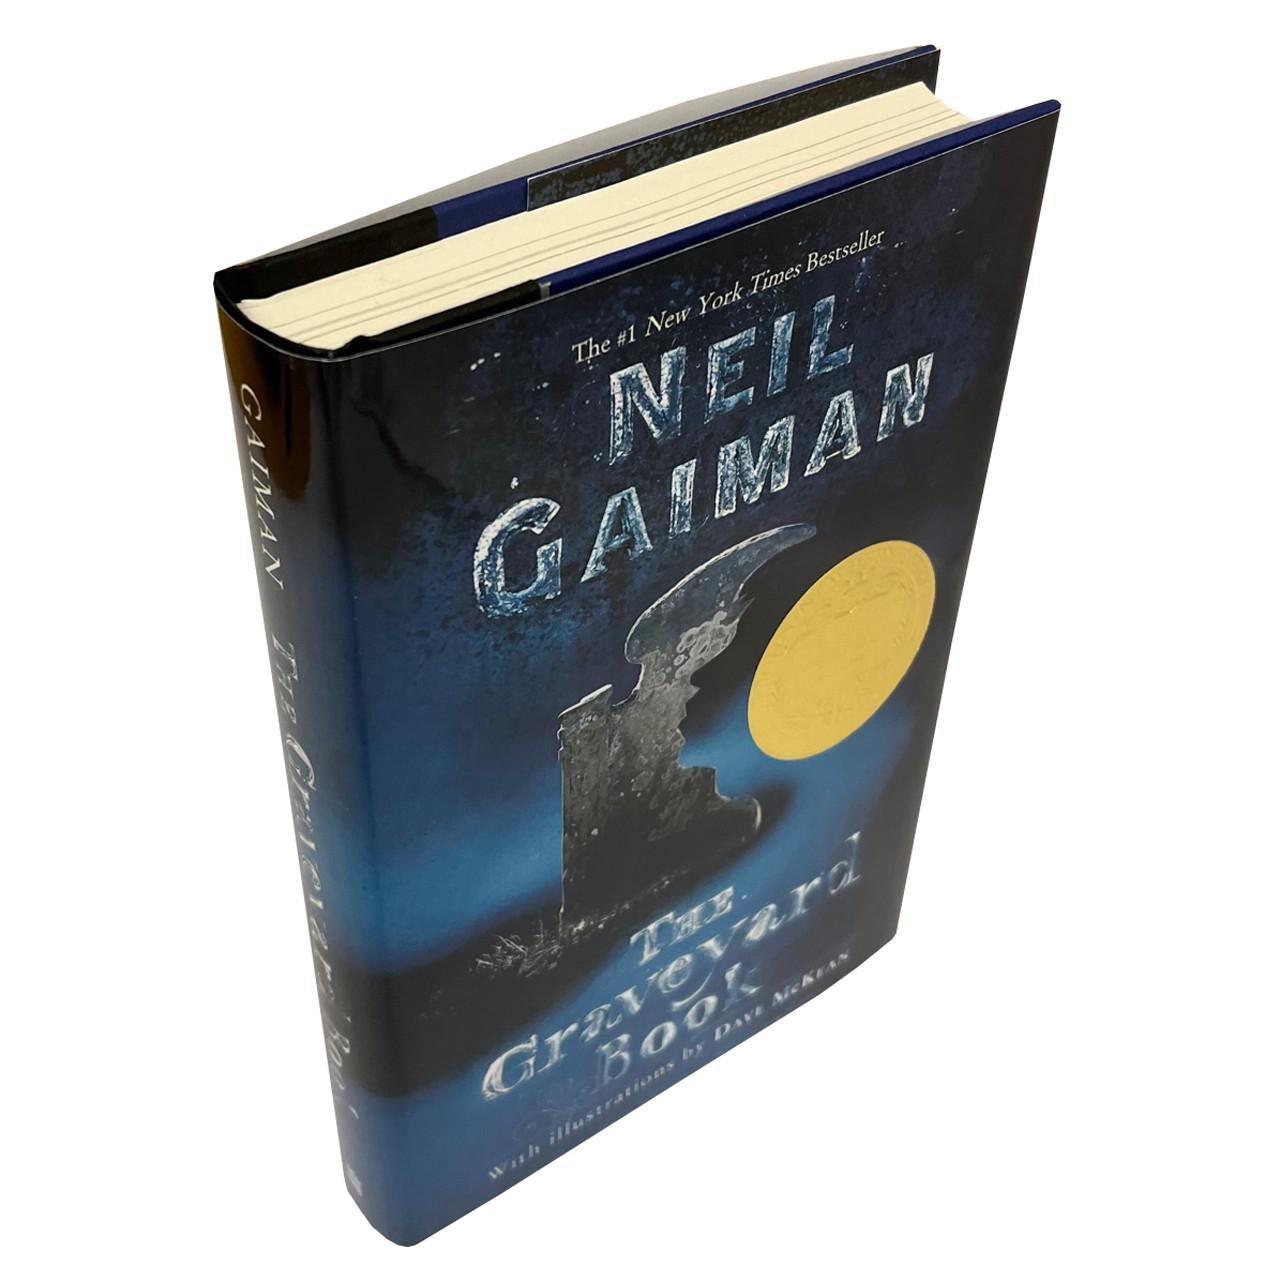 Neil Gaiman "The Graveyard Book" Signed First Edition, Later Printing  [Very Fine]